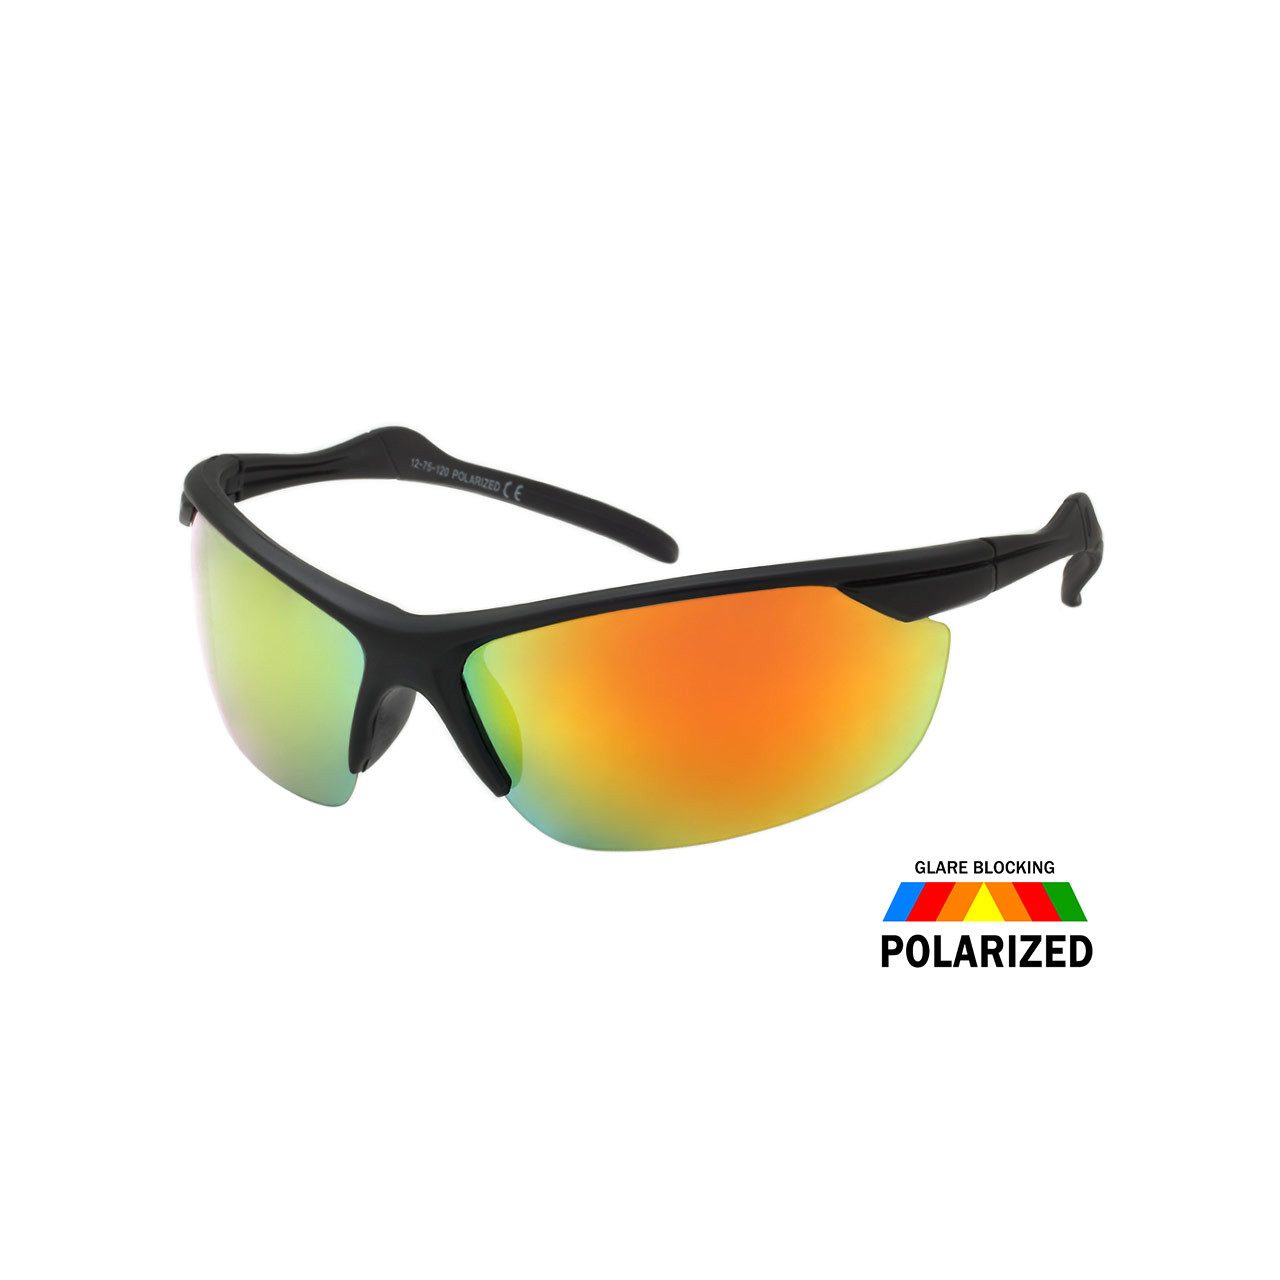 Polarized Running Sunglasses For Men - Sunglasses and Style Blog -  ShadesDaddy.com